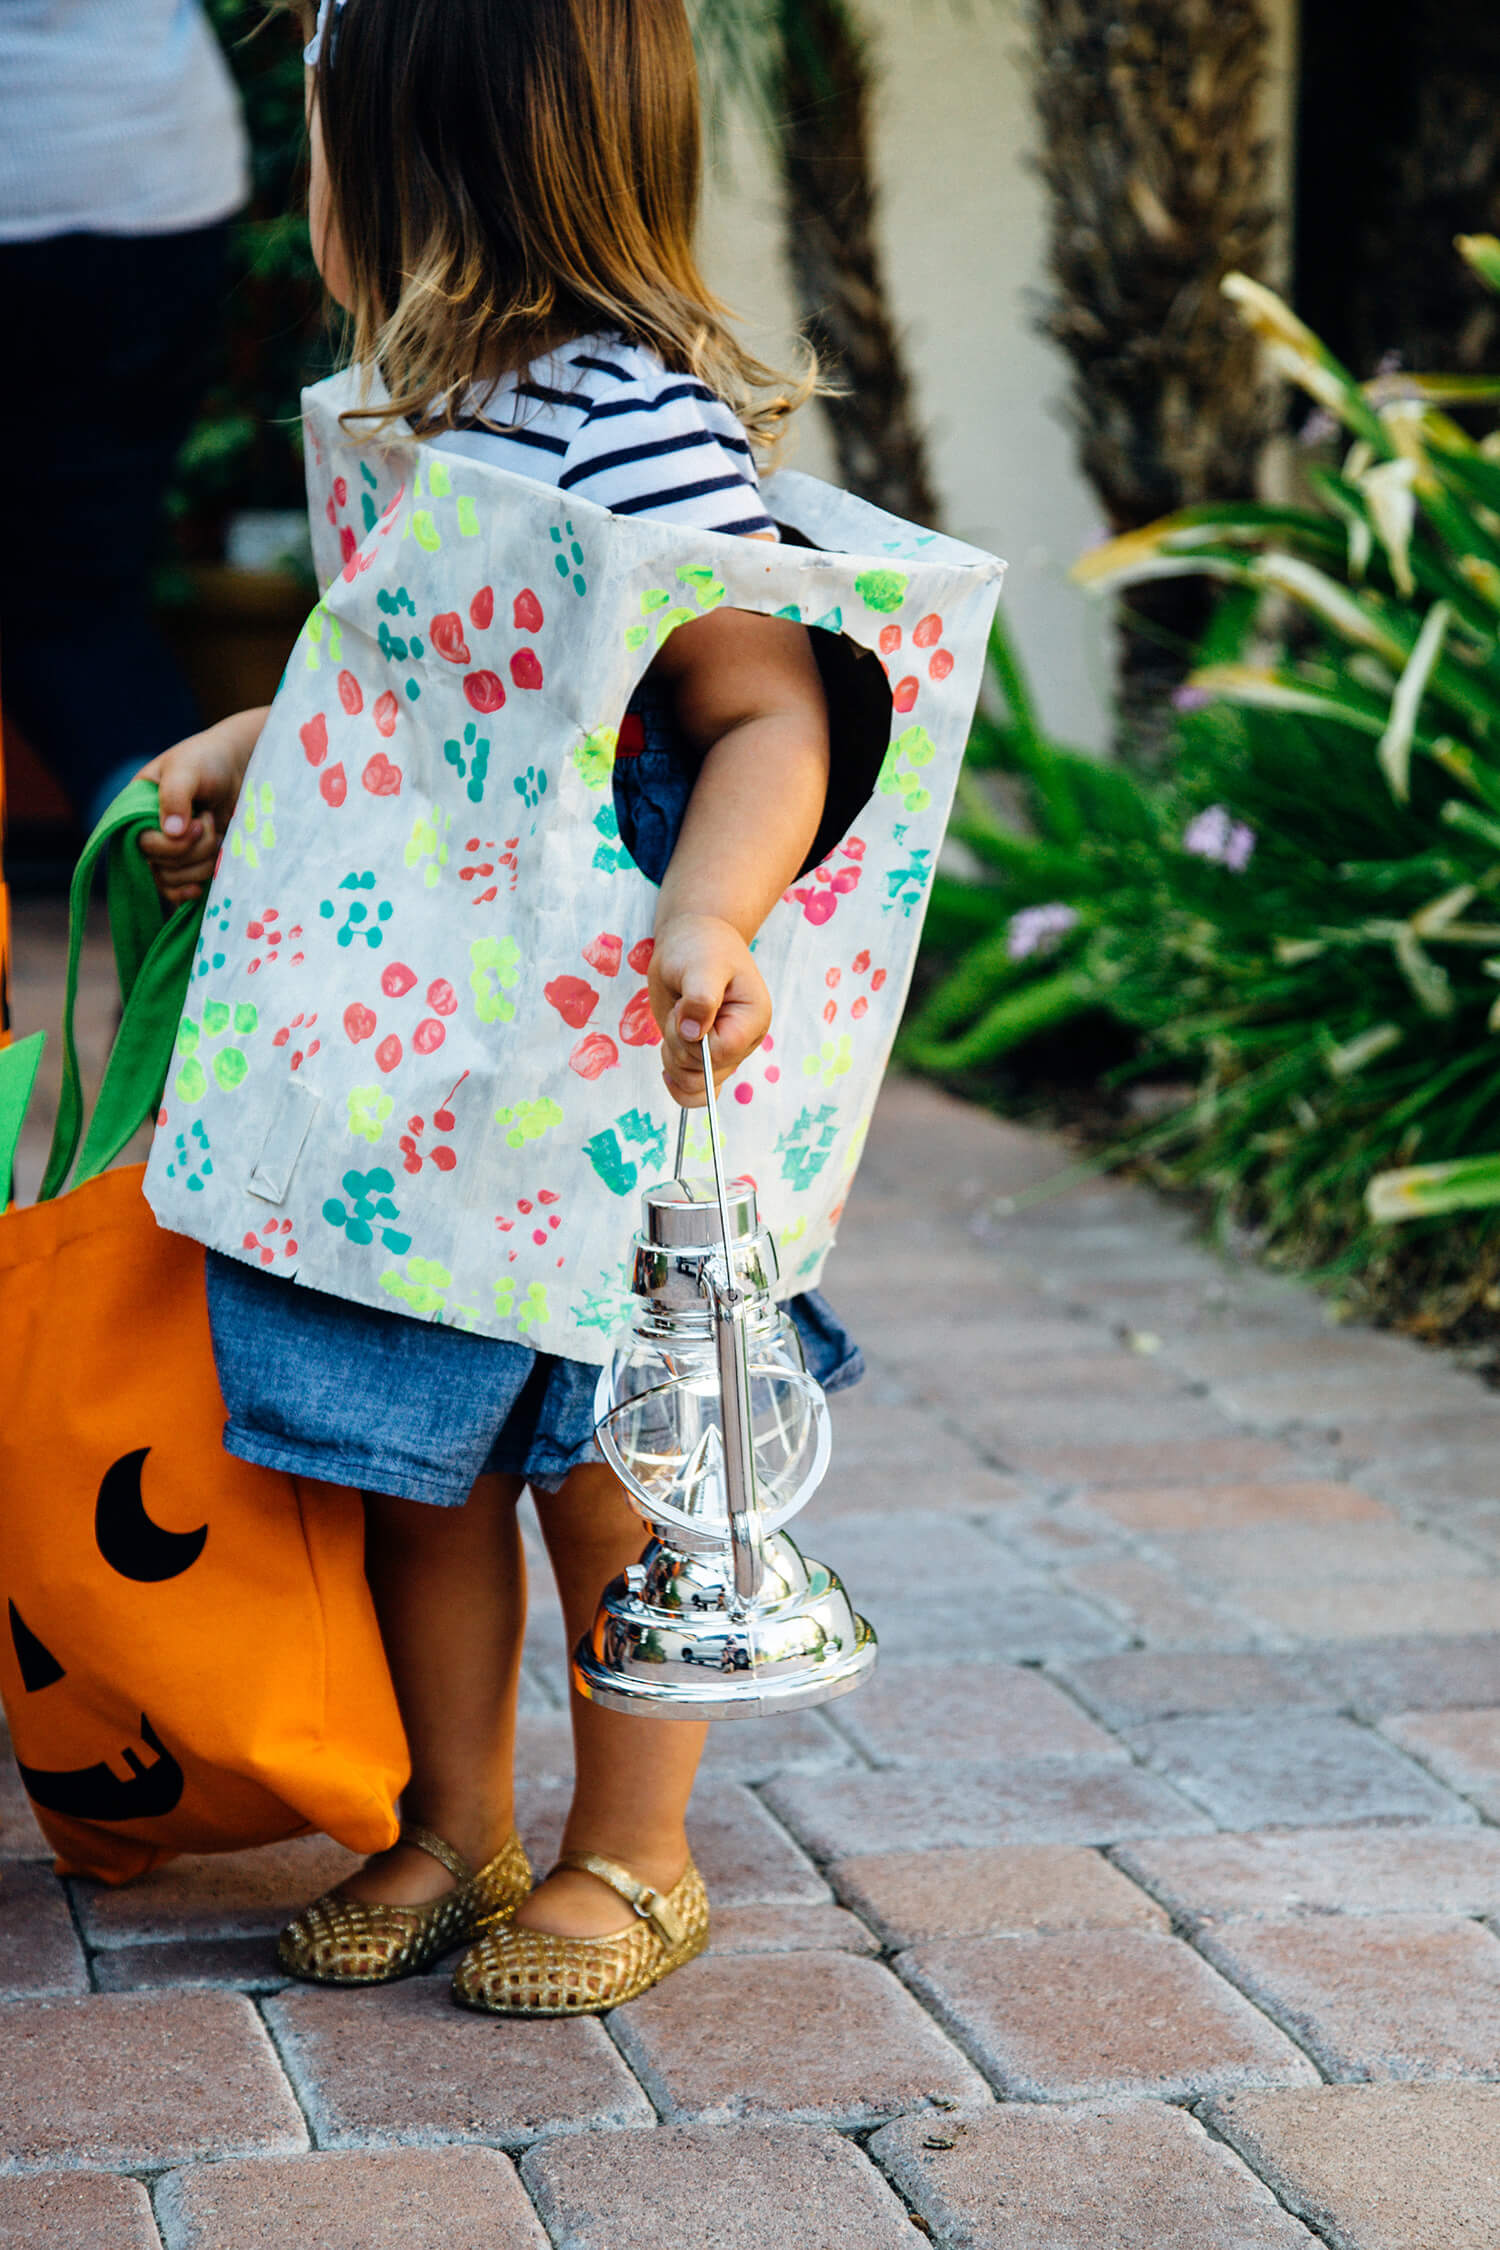 Halloween Paper Bag Costumes Idea For Kids